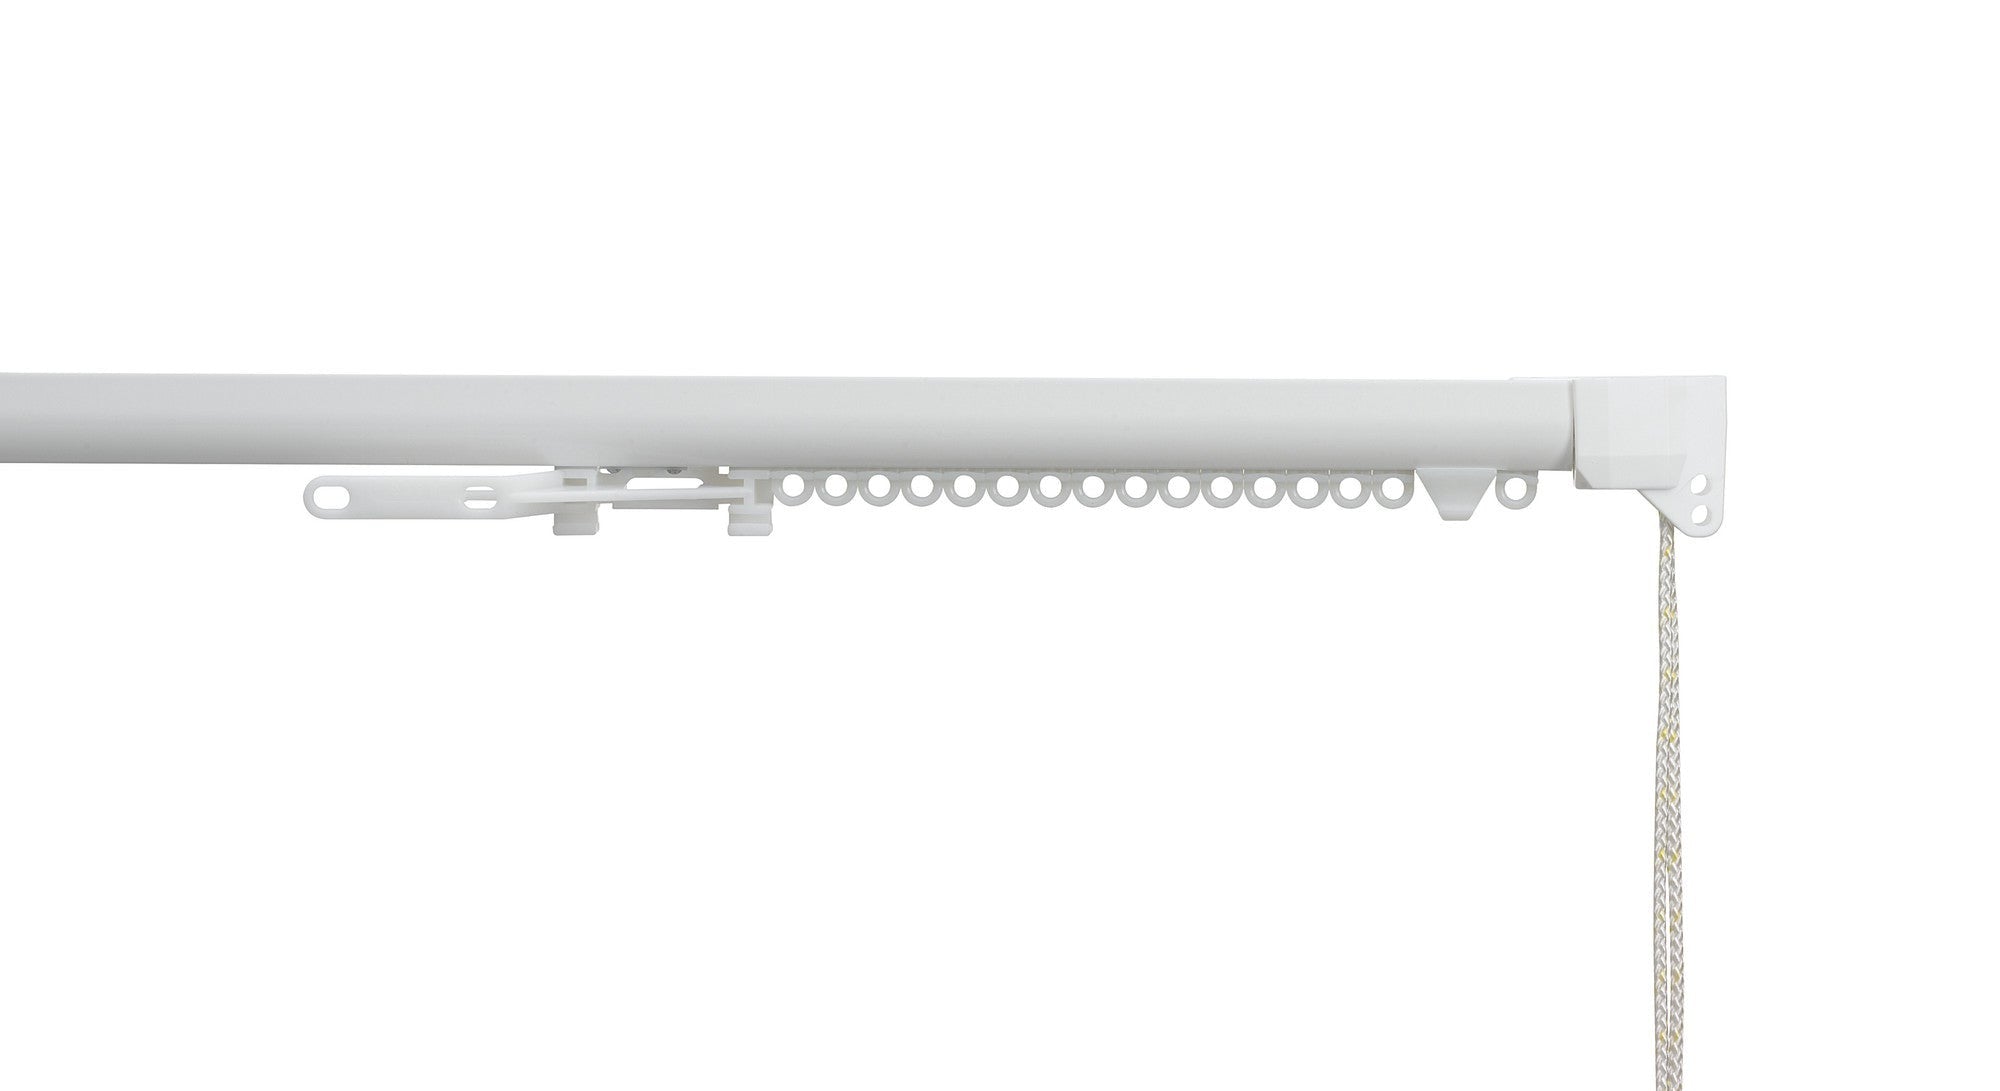 Silent Gliss 3840 Curtain Track in White